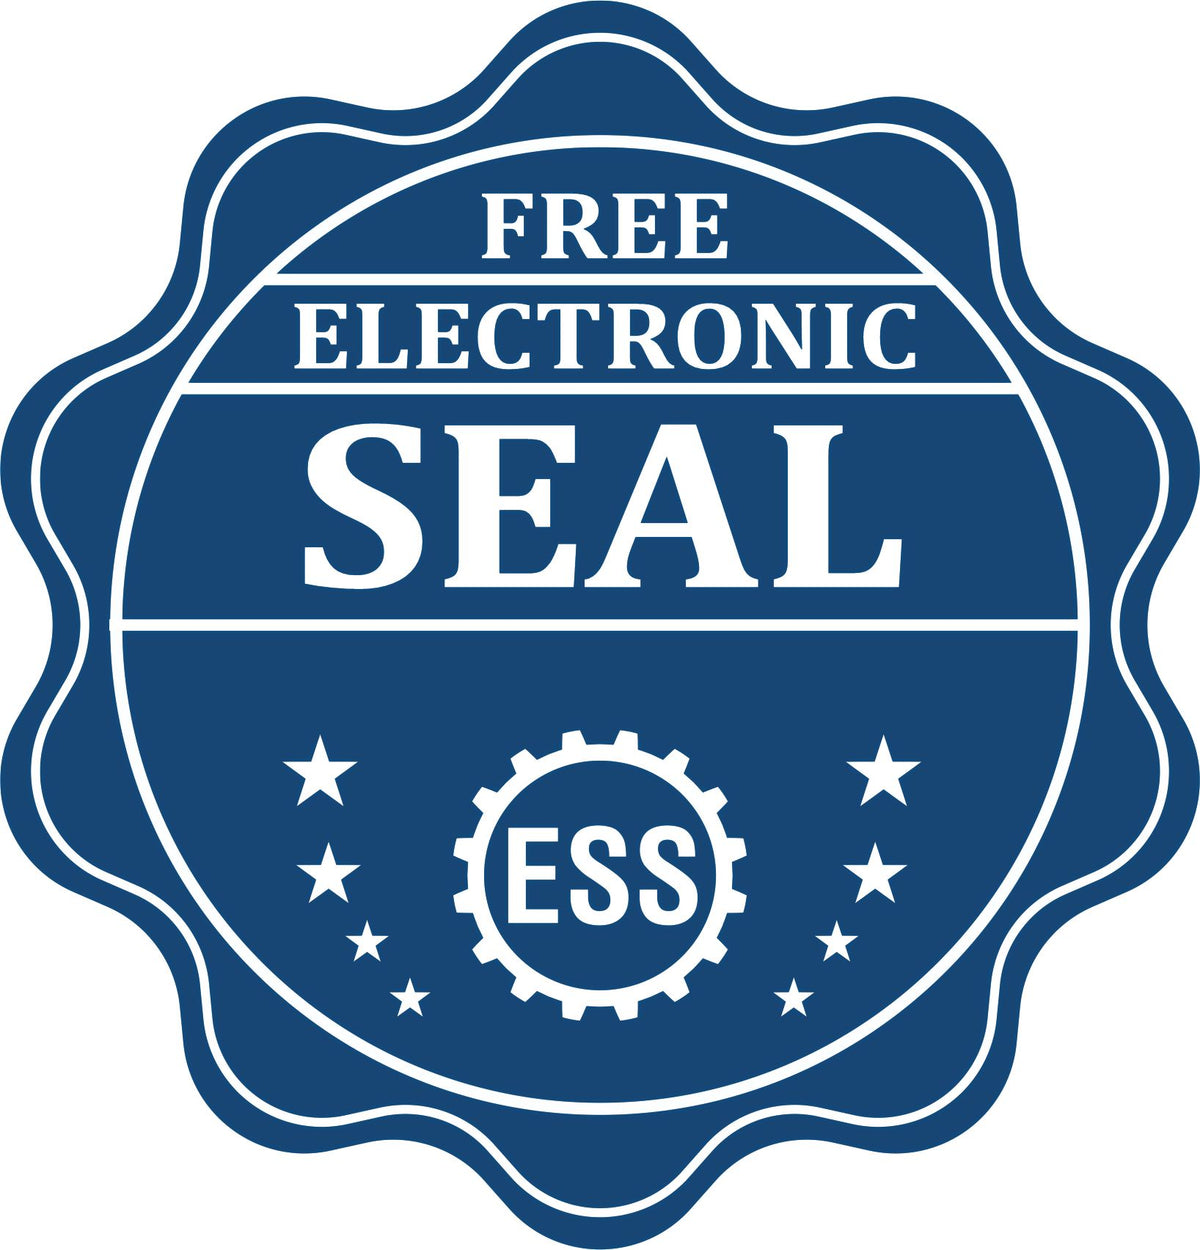 A badge showing a free electronic seal for the Soft Utah Professional Geologist Seal with stars and the ESS gear on the emblem.